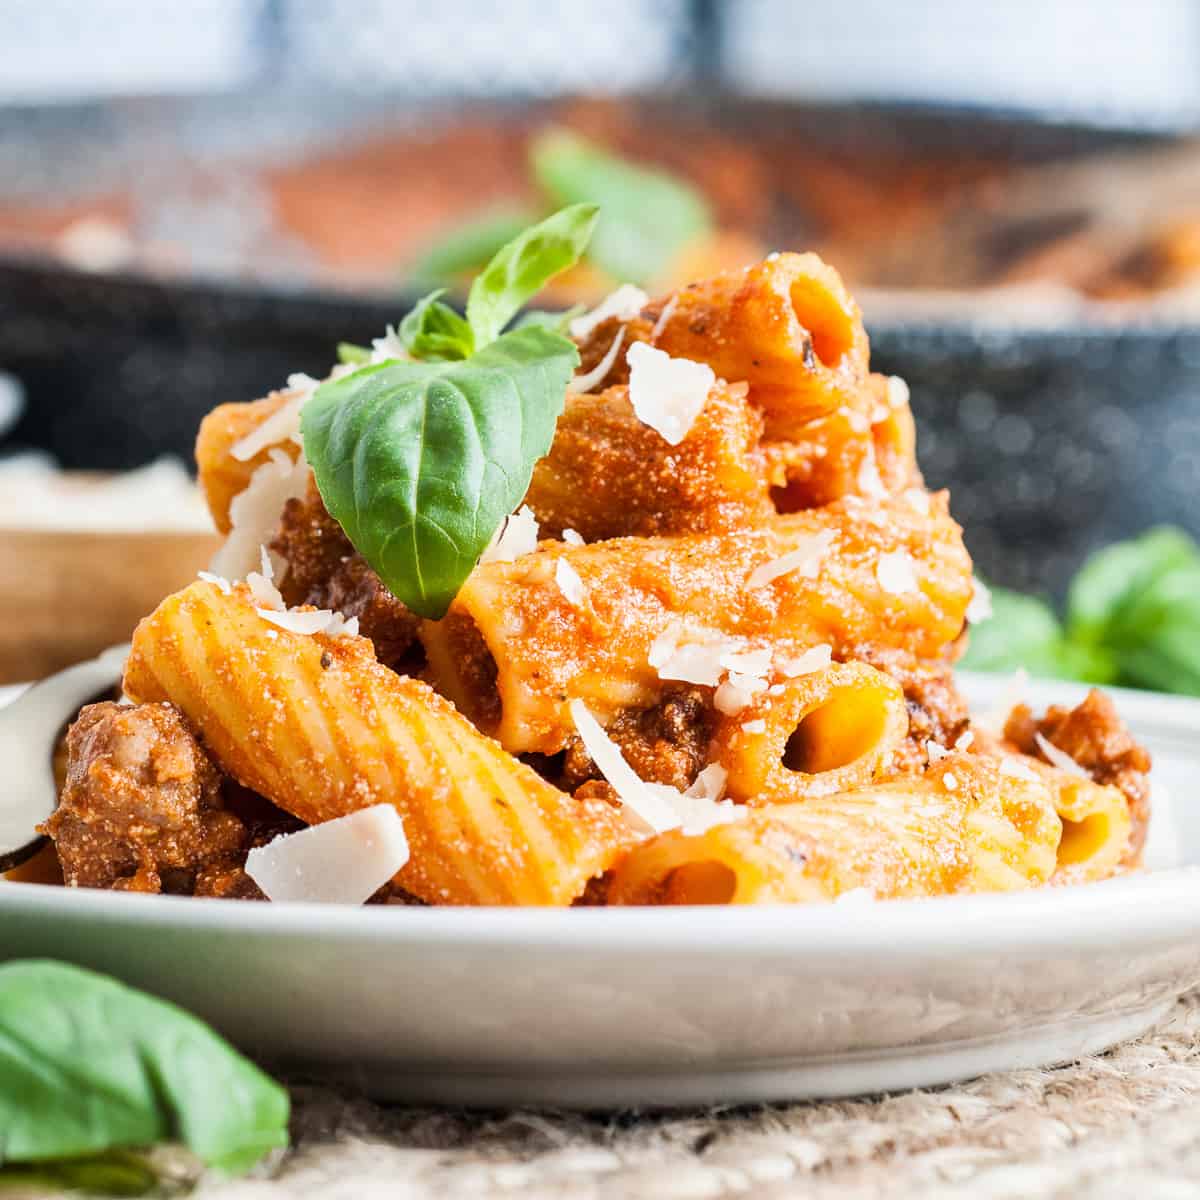 Rigatoni Pasta with Cottage Cheese